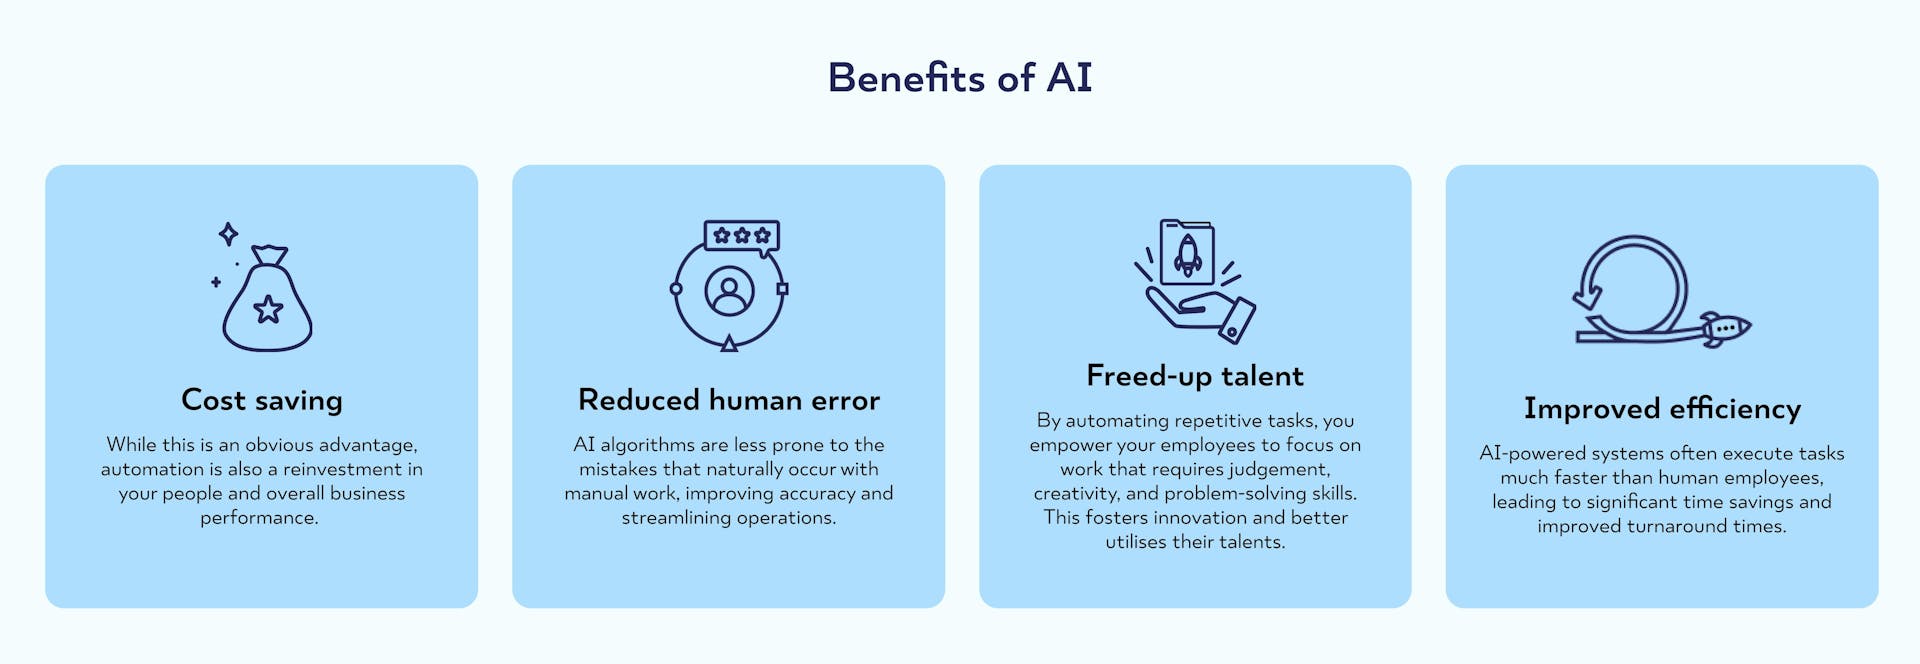 benefits of AI table